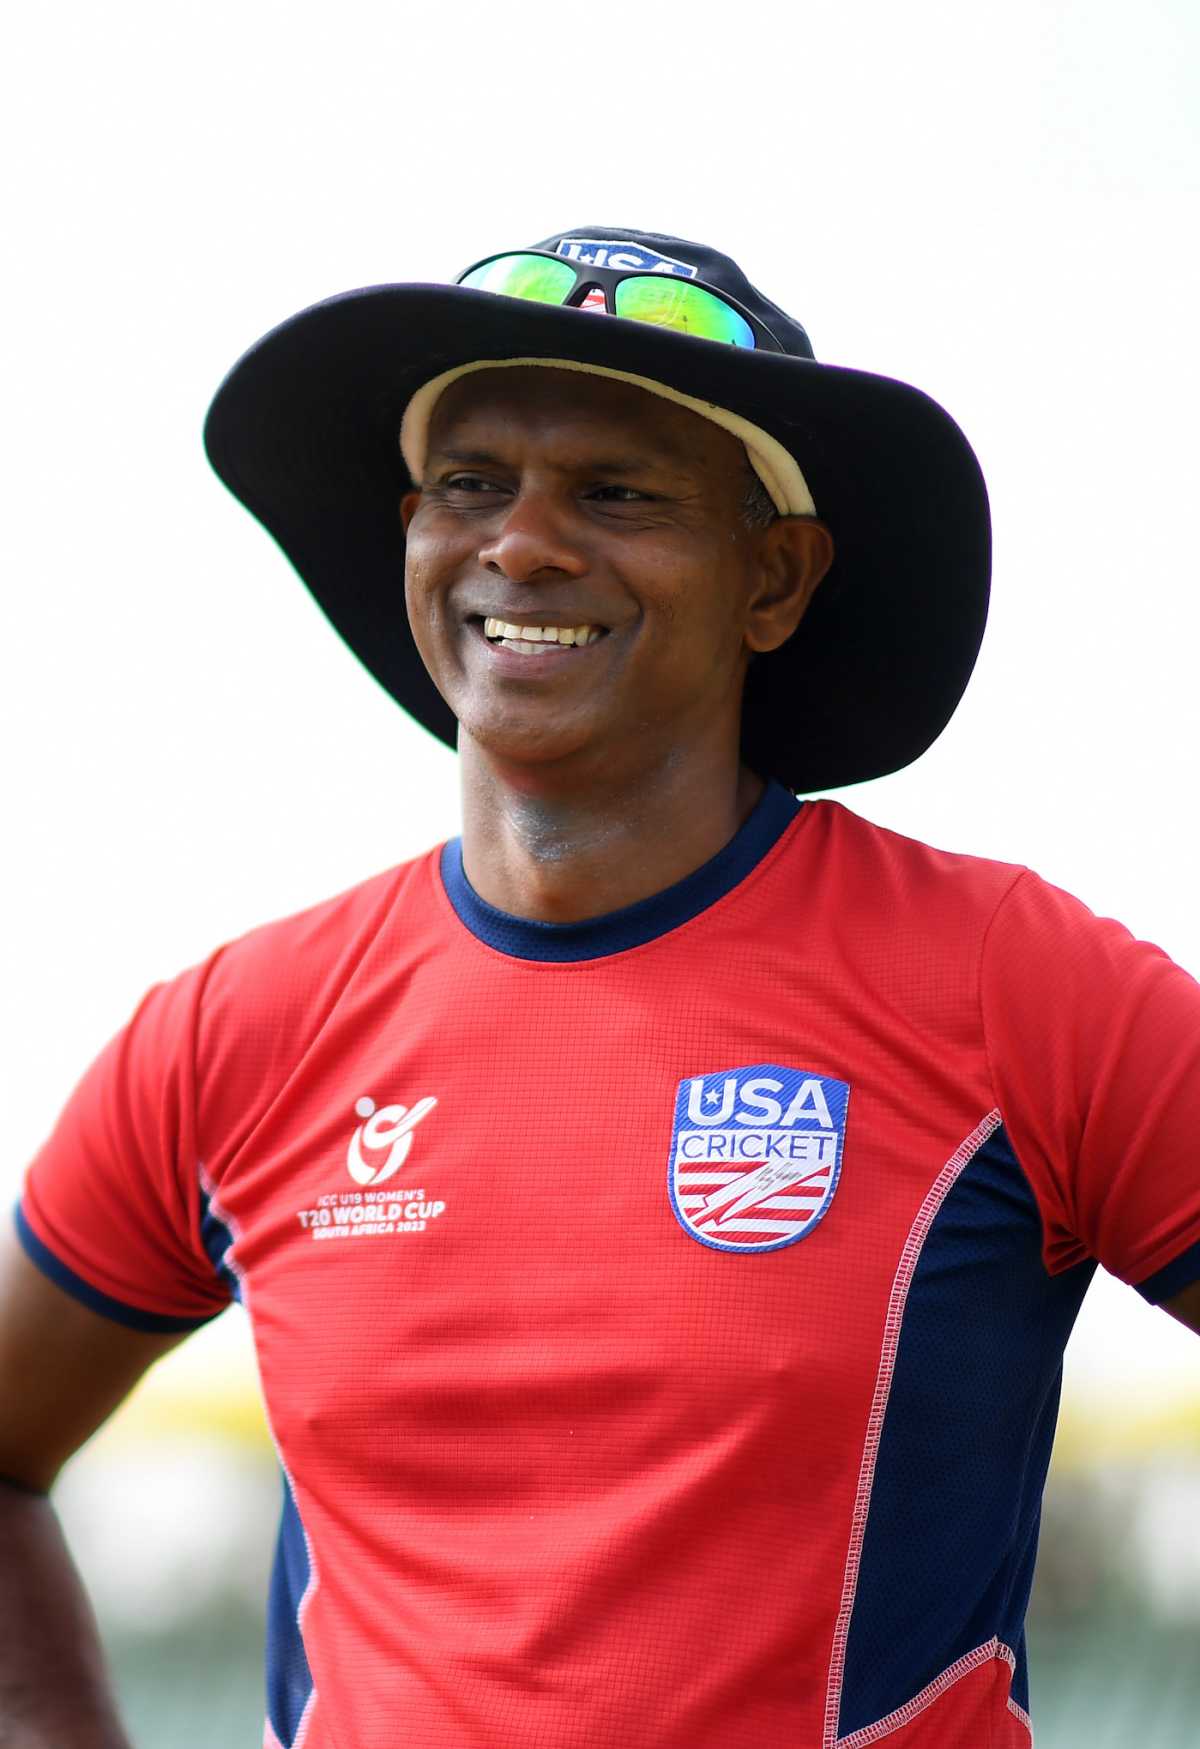 USA head coach Shivnarine Chanderpaul ahead of their game against Scotland, USA vs Scotland, Women's Under-19 T20 World Cup, 4th place playoff, Benoni, January 20, 2023